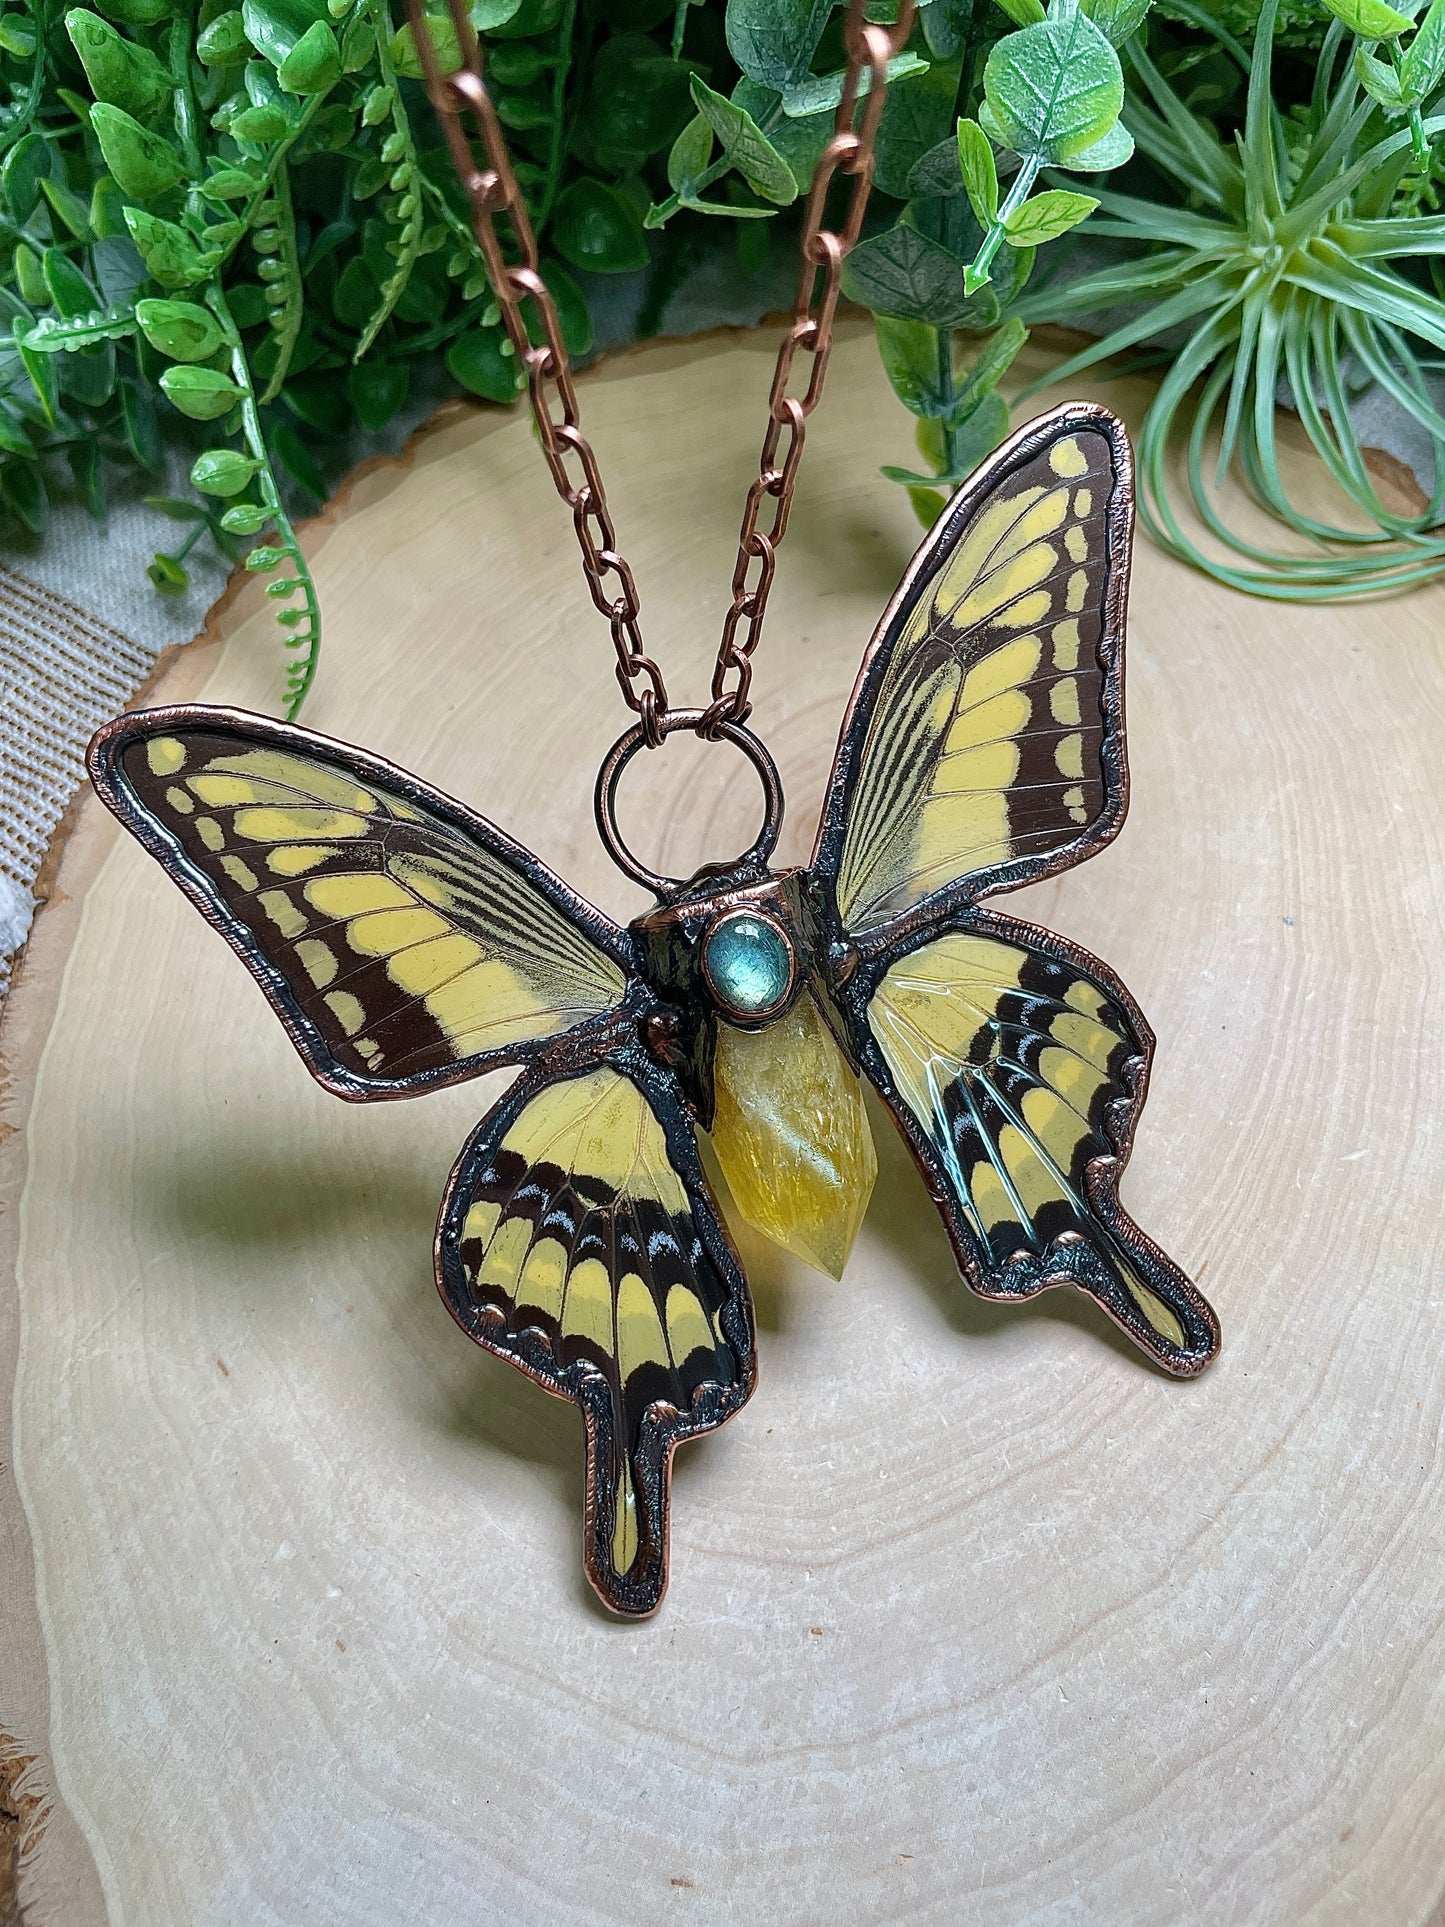 Queen of the Flower Garden- Butterfly Wing Necklace